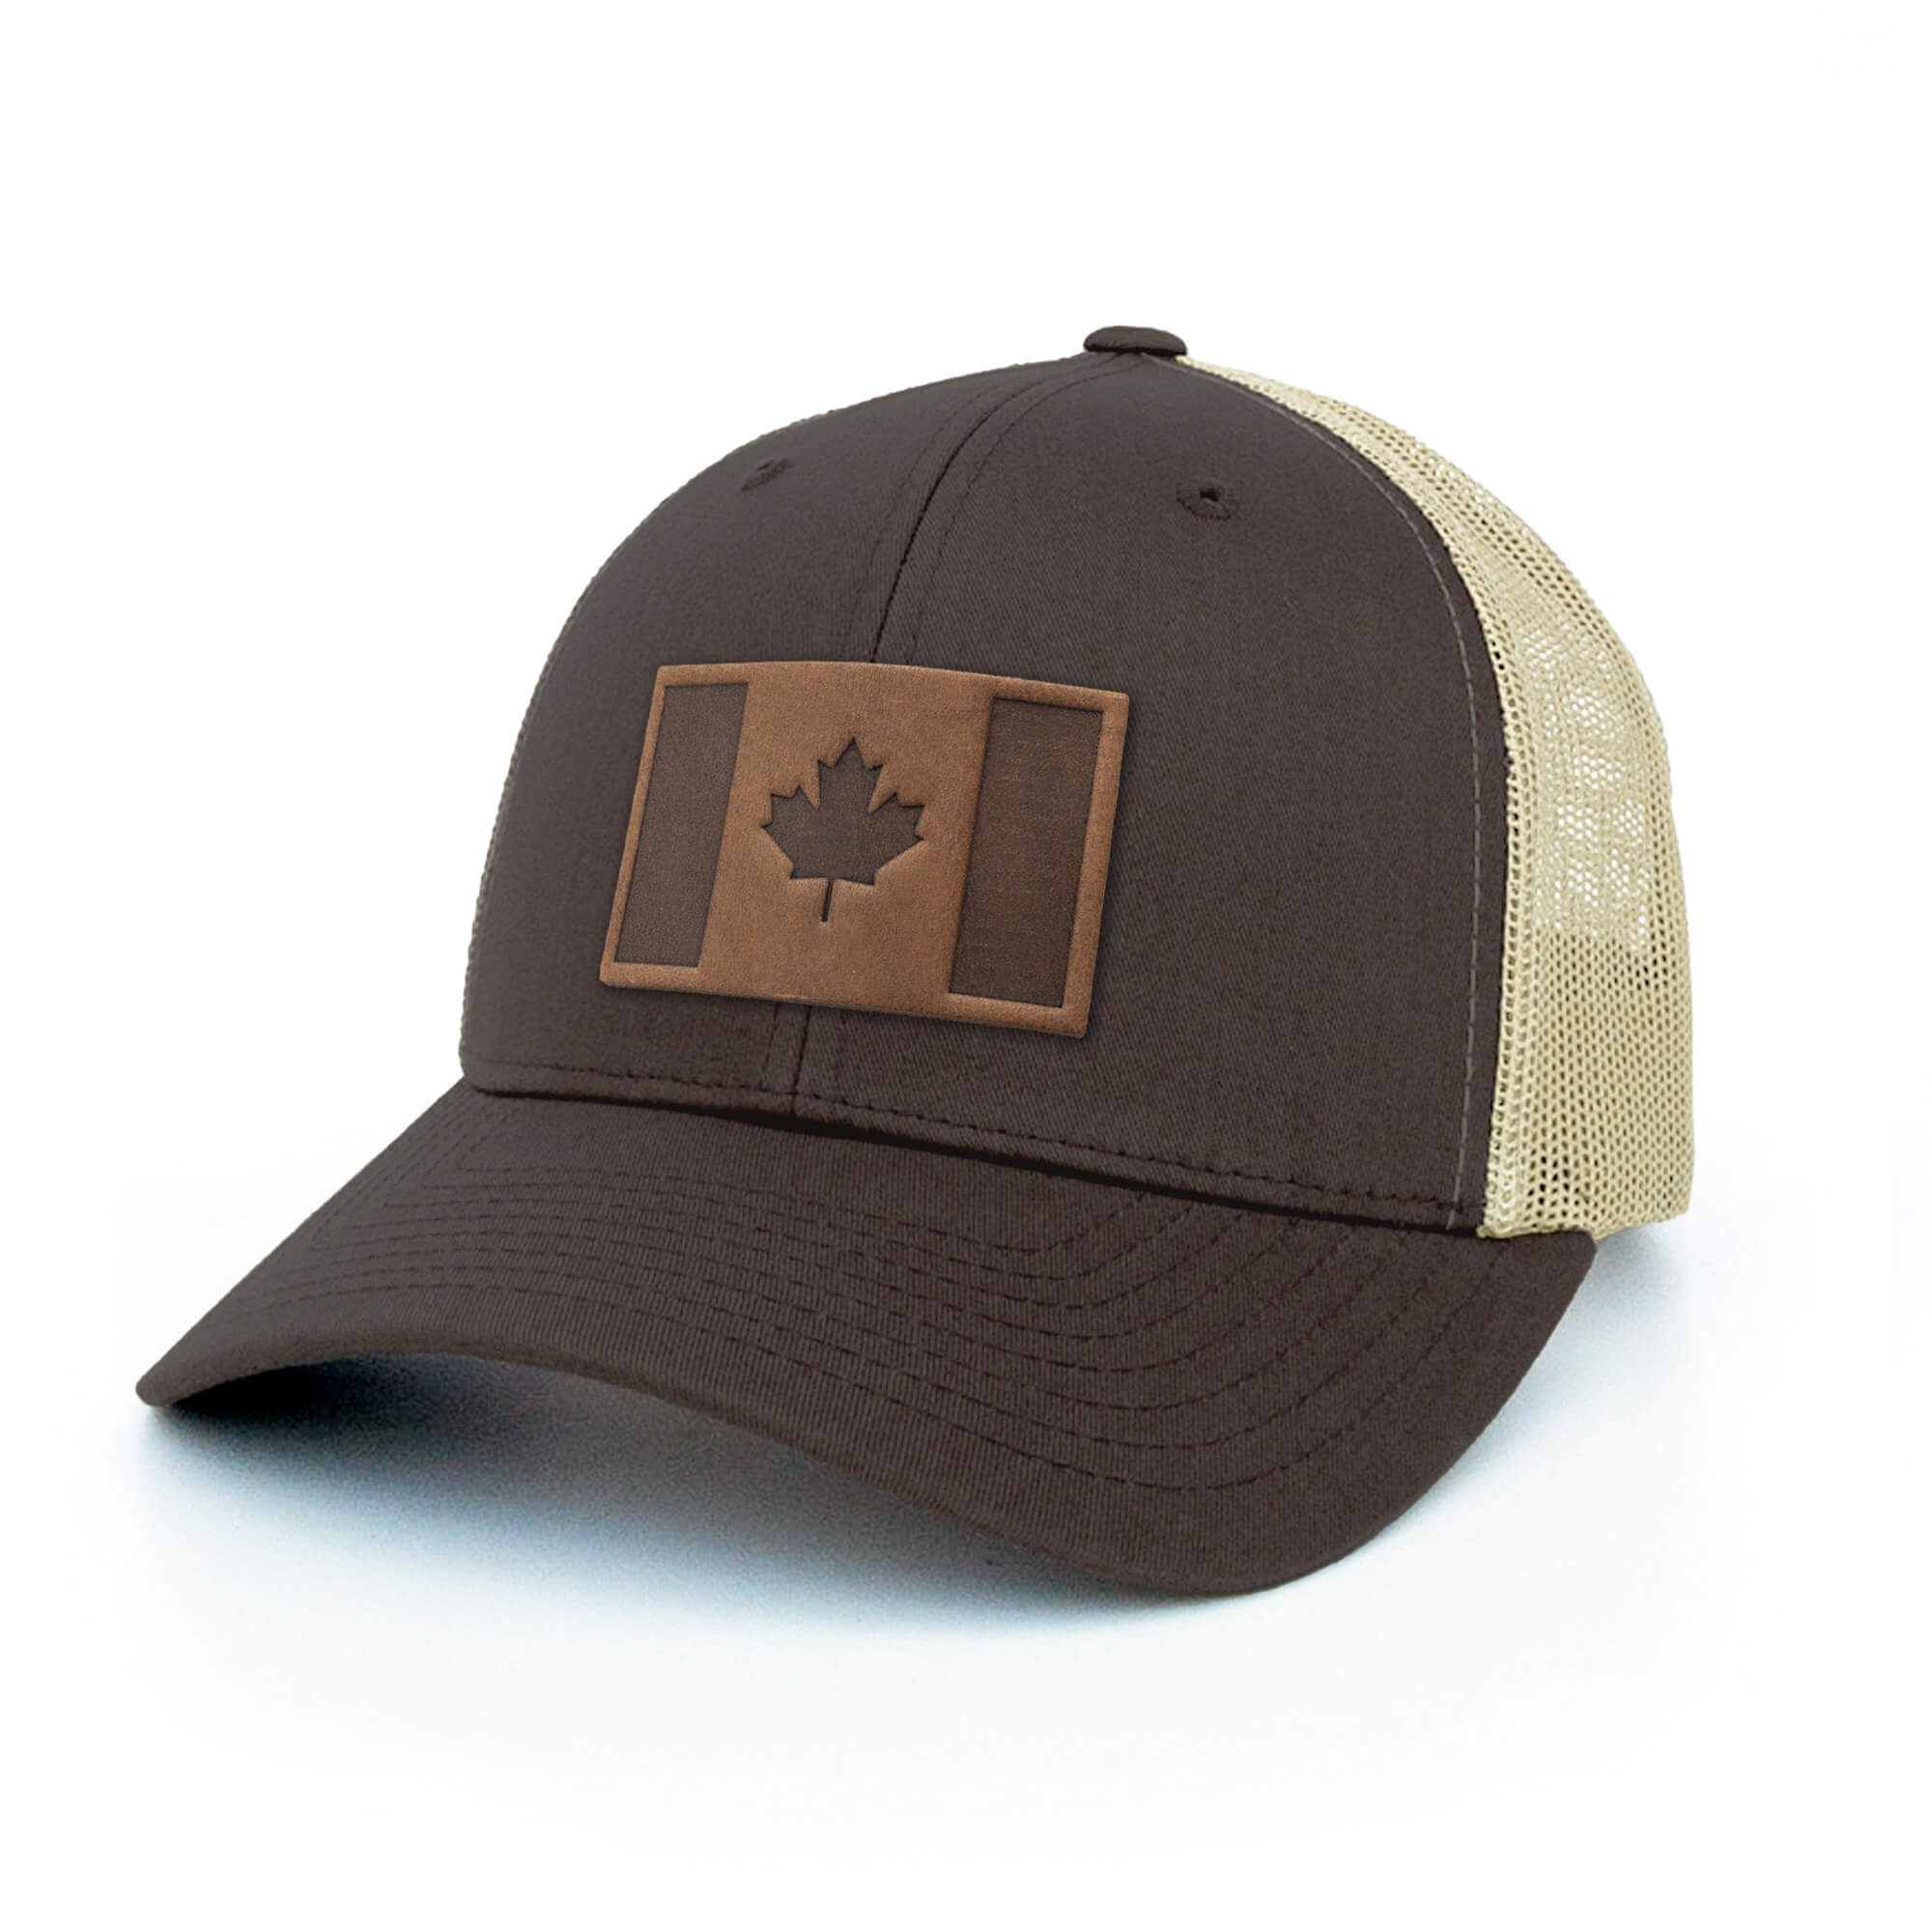 Brown and khaki trucker hat with full-grain leather patch of Canada Flag | BLACK-002-009, CHARC-002-009, NAVY-002-009, HGREY-002-009, MOSS-002-009, BROWN-002-009, RED-002-009